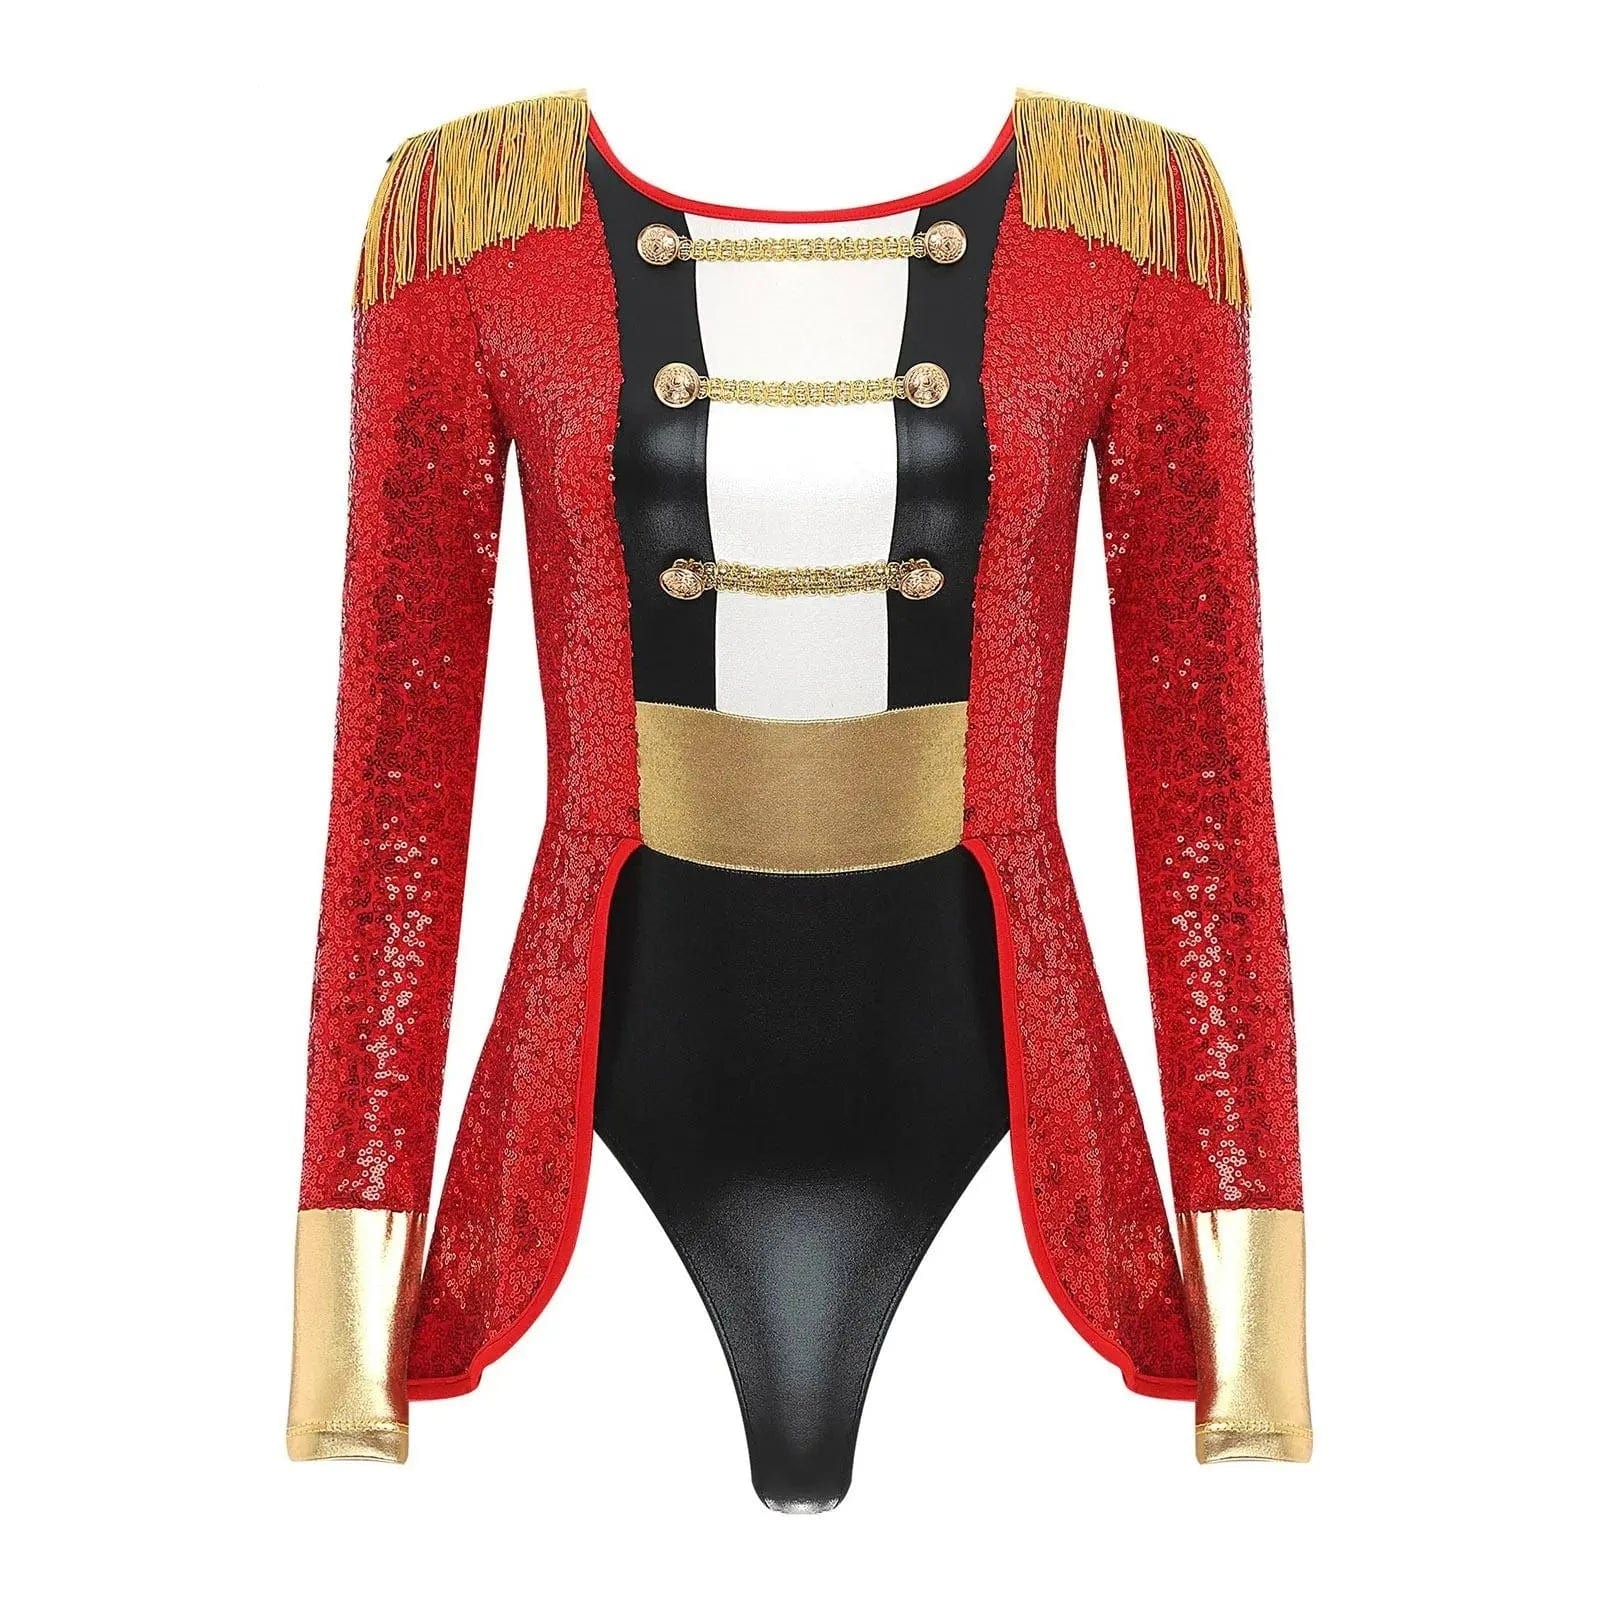 Kinky Cloth Circus Ringmaster Outfit Costumes